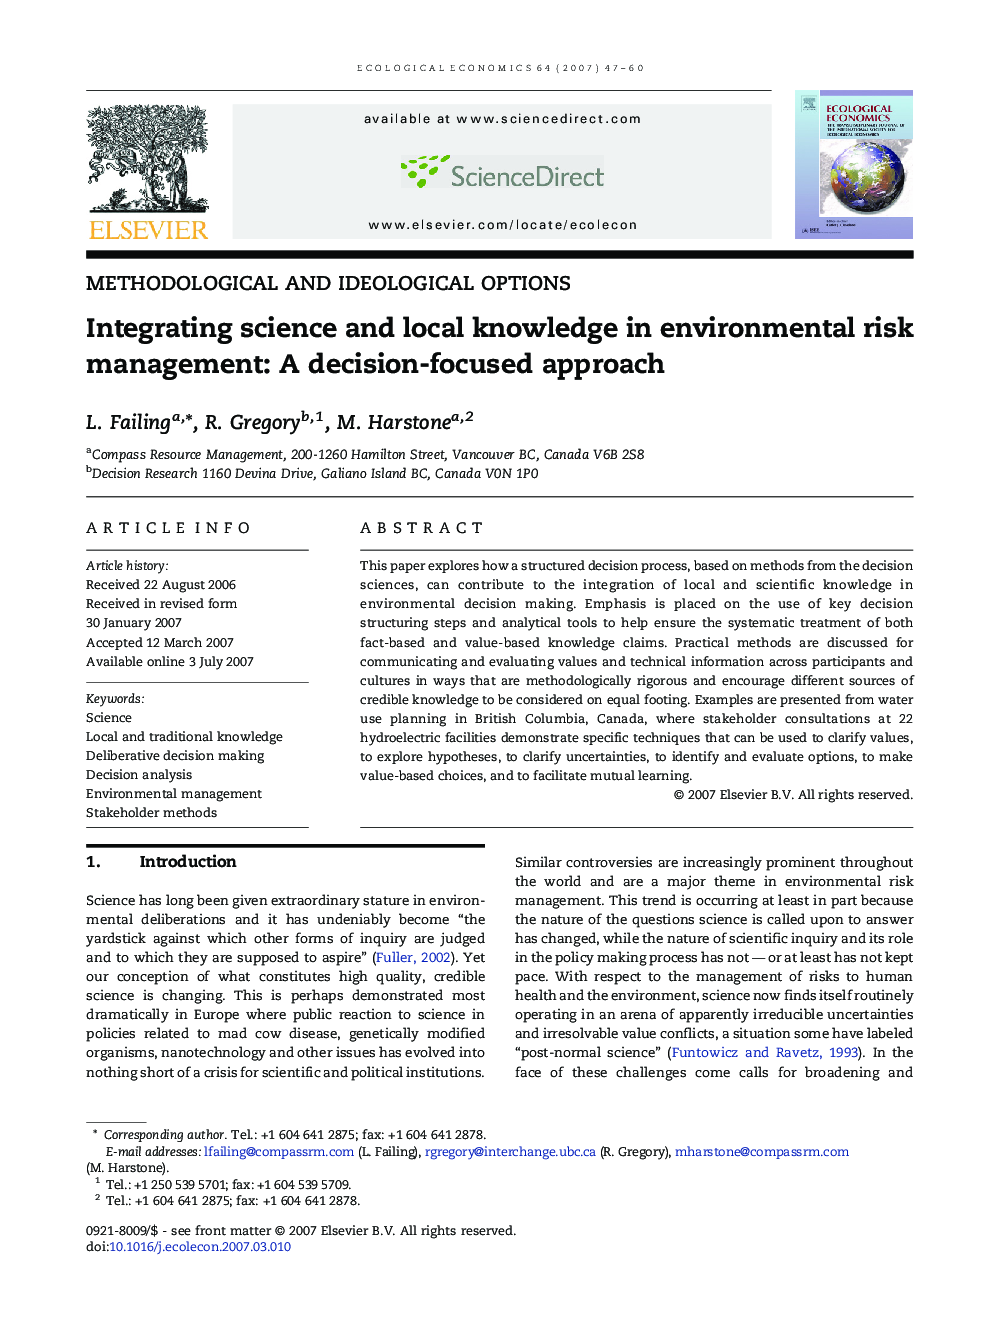 Integrating science and local knowledge in environmental risk management: A decision-focused approach